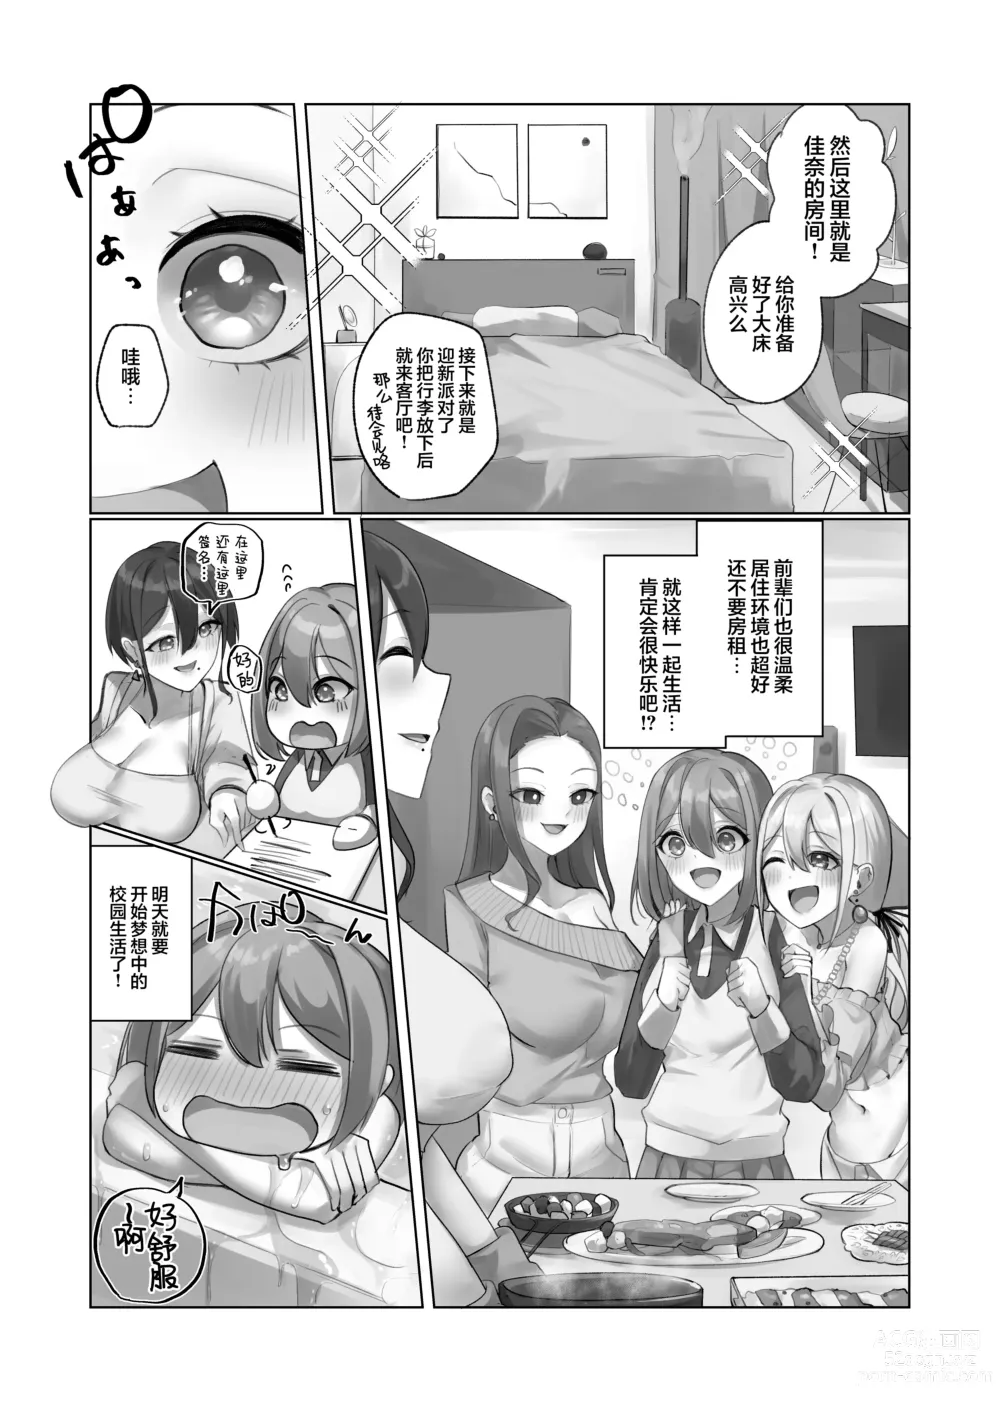 Page 4 of doujinshi Youkoso  Share House e